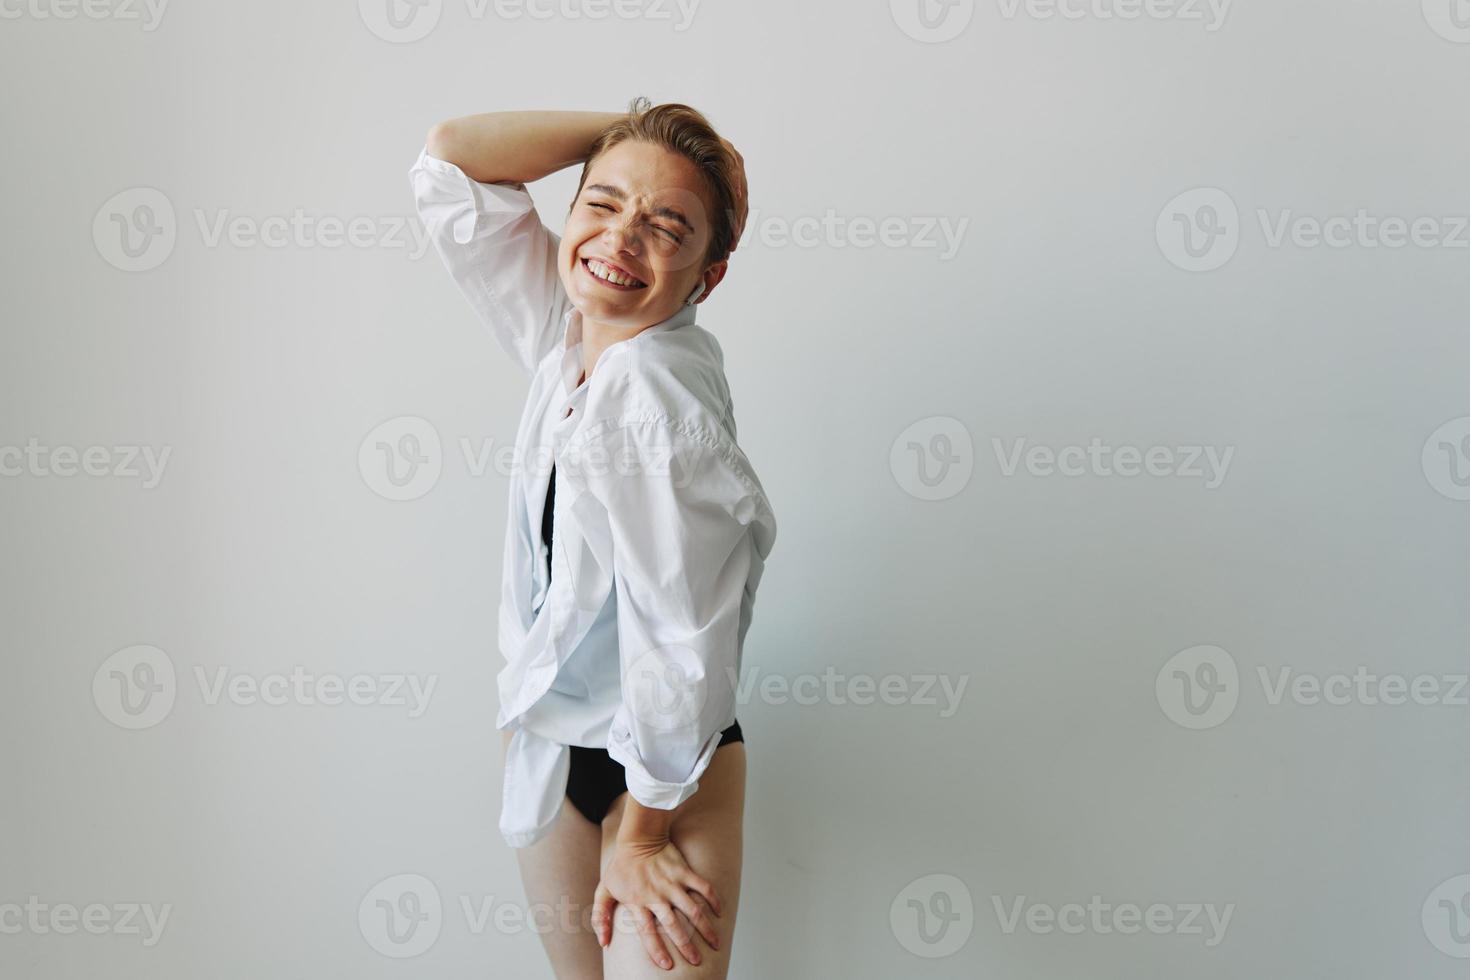 Young woman teenager listening to music with infertile headphones and dancing home, grinning with teeth with a short haircut in a white shirt on a white background. Girl natural poses with no filters photo